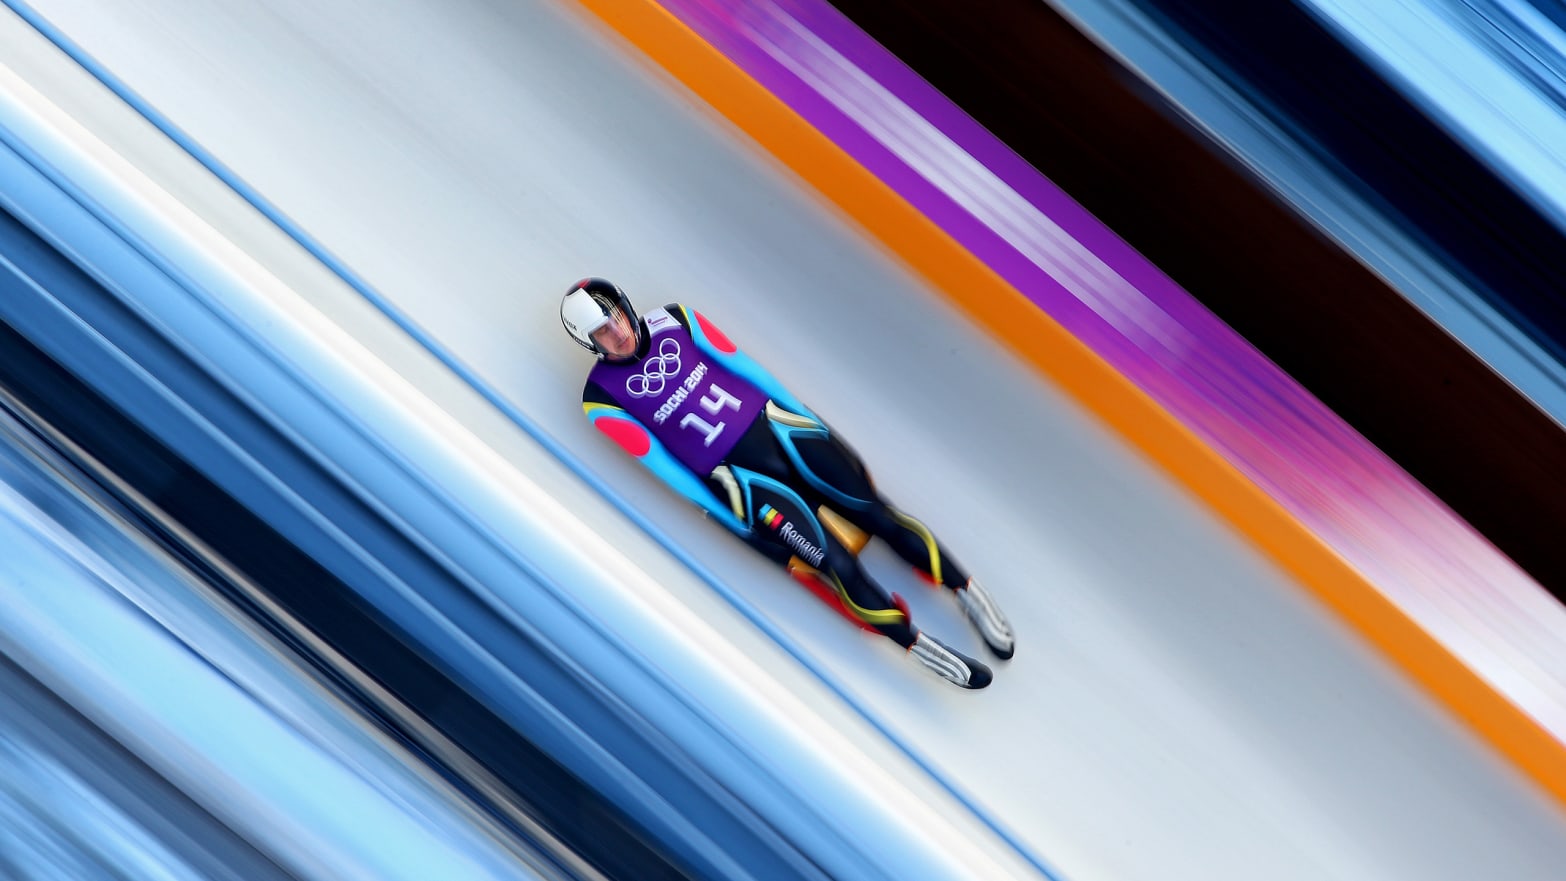 Luge 2018 Olympics Full Schedule, How to Watch